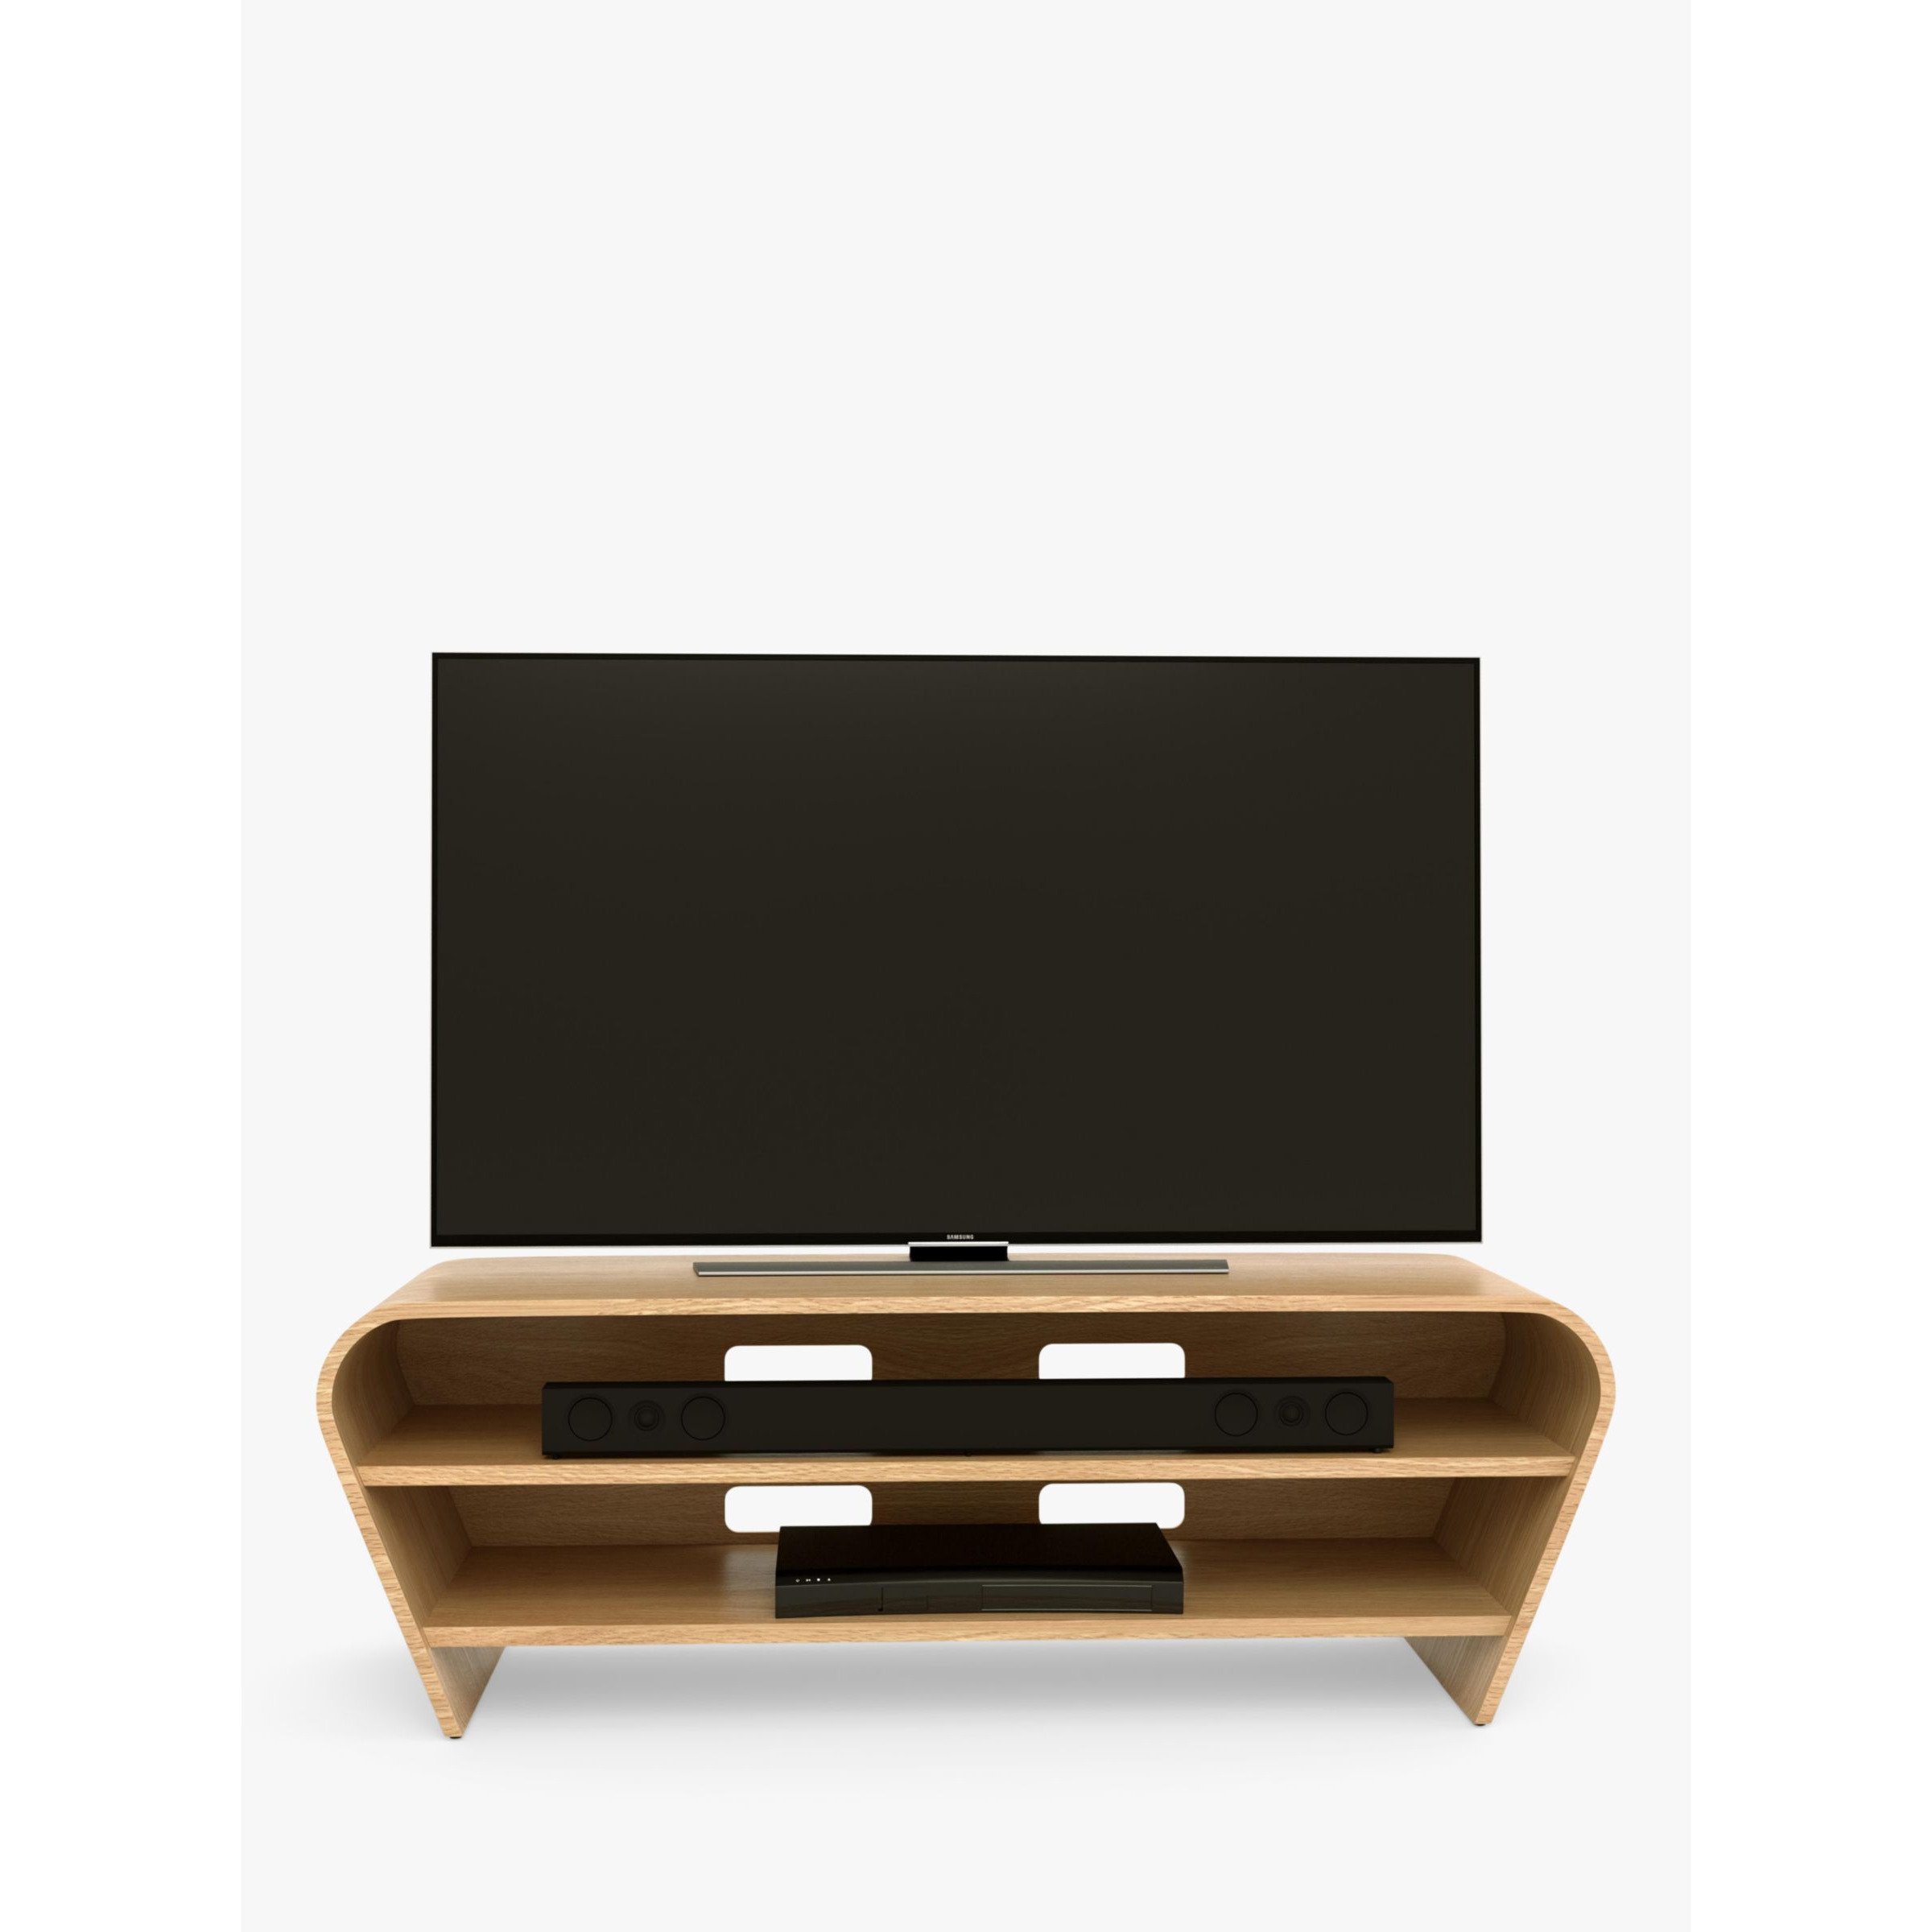 "Tom Schneider Taper 1250 TV Stand for TVs up to 55""" - image 1